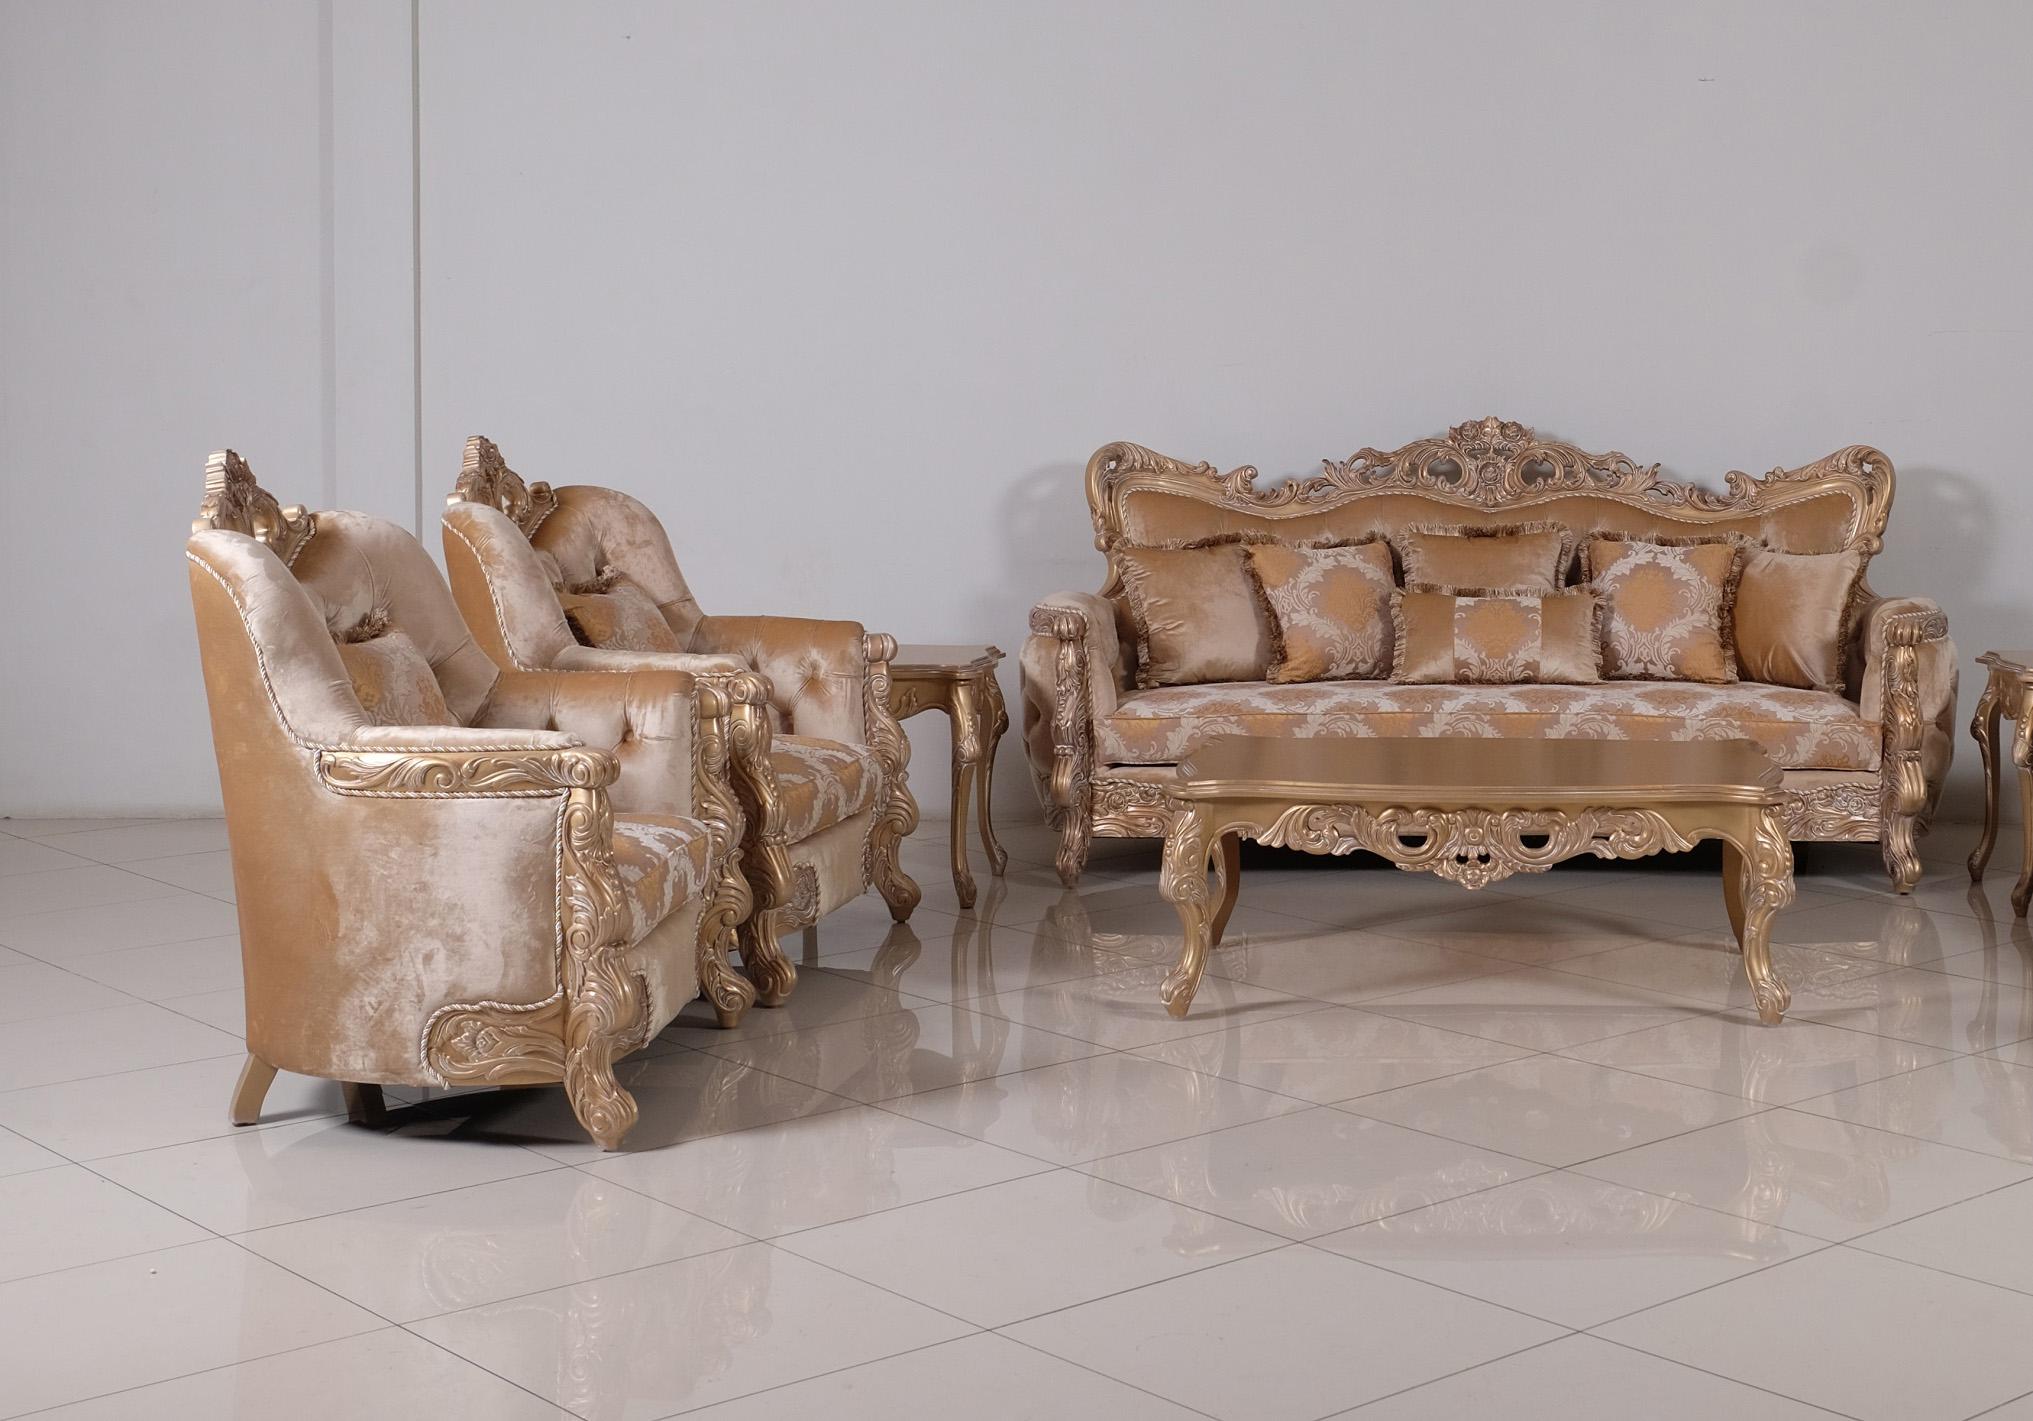 

    
 Order  Luxury Champagne & Cooper IMPERIAL PALACE Chair Set 2 Pcs EUROPEAN FURNITURE Classic
